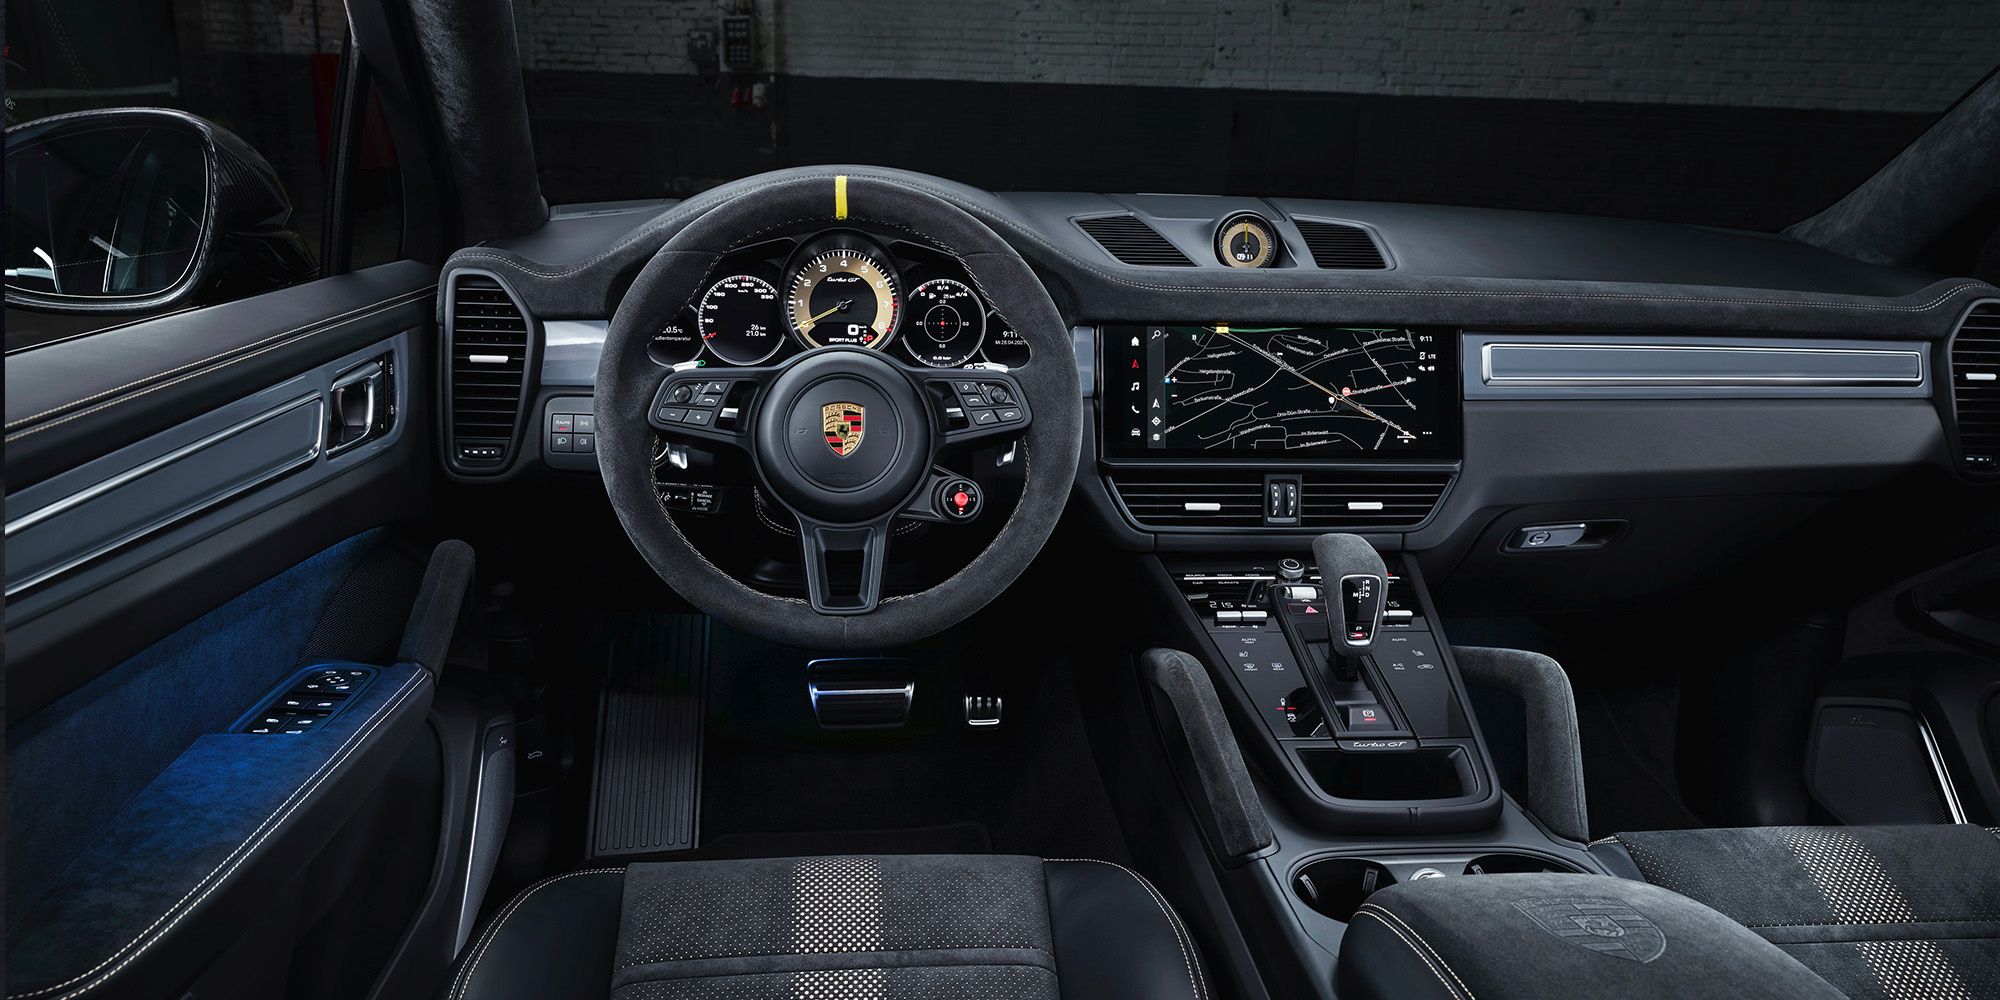 The interior of the Cayenne Turbo GT